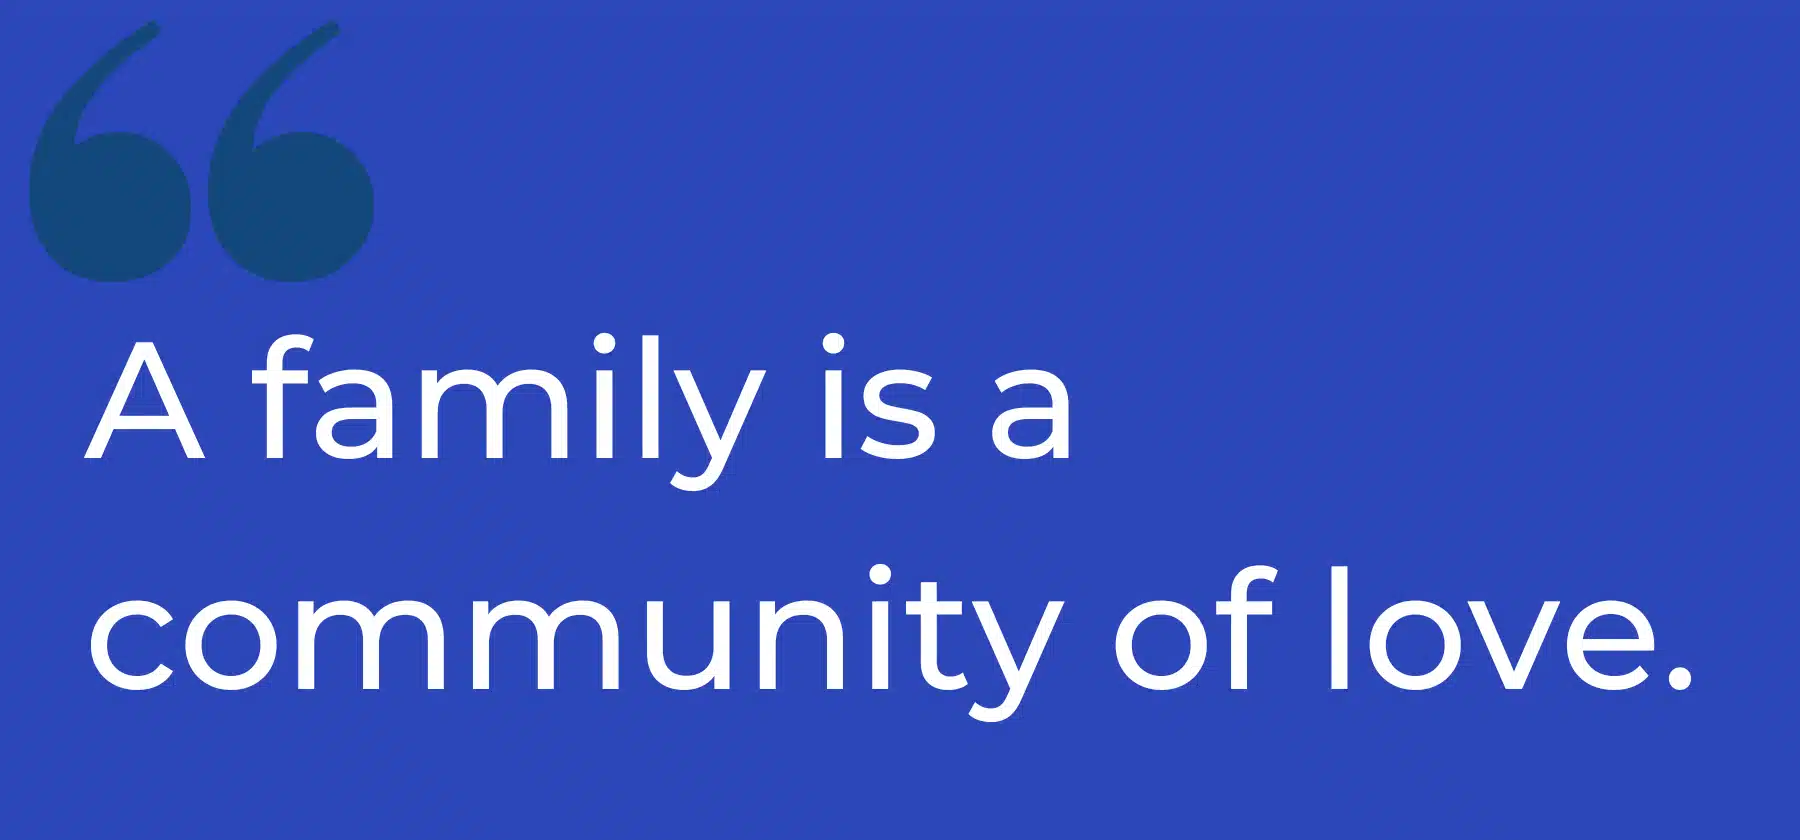 family is a community of love quotation